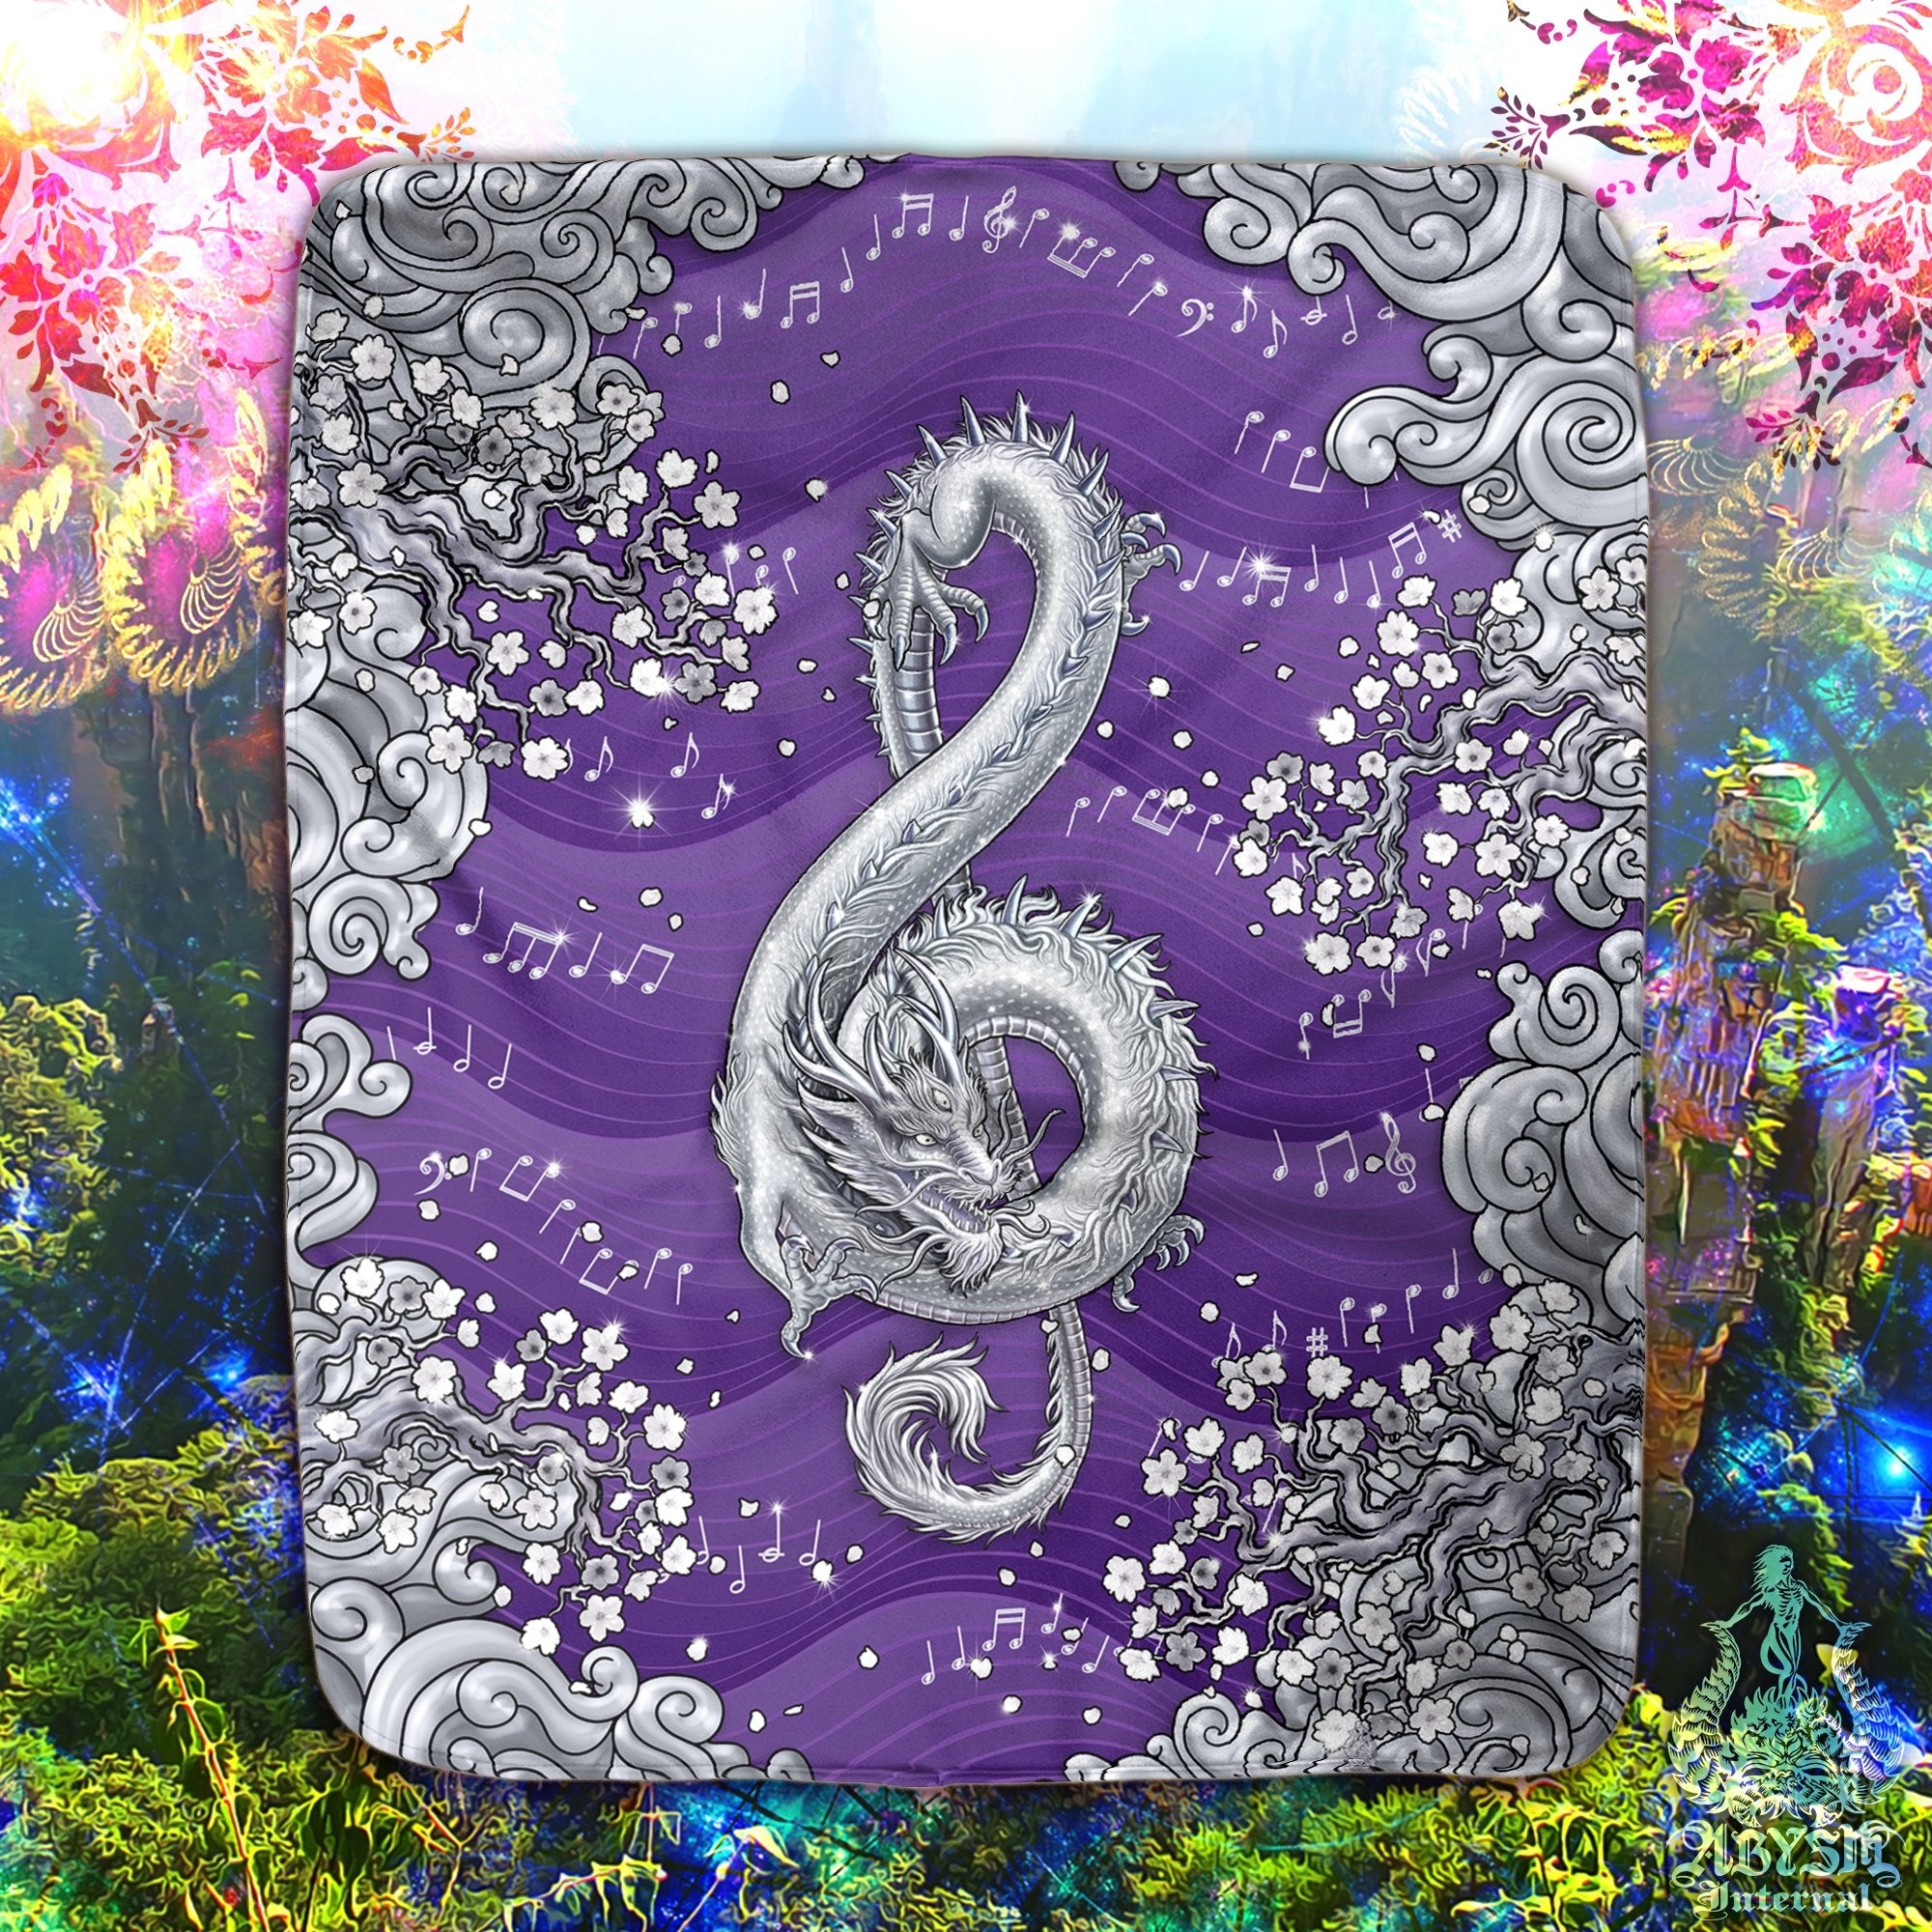 White Dragon Throw Fleece Blanket, Treble Clef, Music Art, Asian Decor, Eclectic and Funky Gift - Purple - Abysm Internal